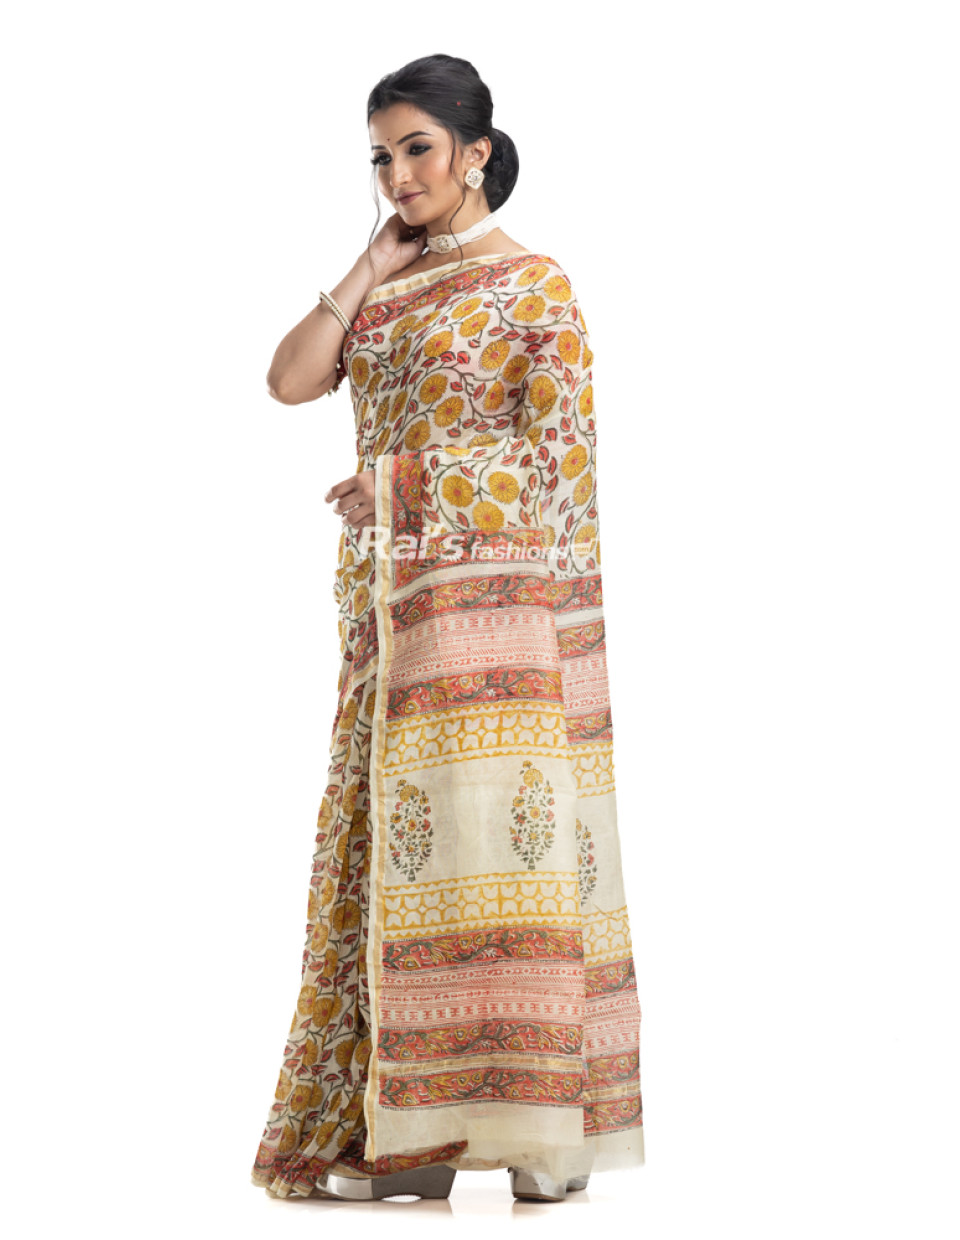 Off White Chanderi Silk Saree With All Over Floral Print And Golden Zari Border (KR2231)